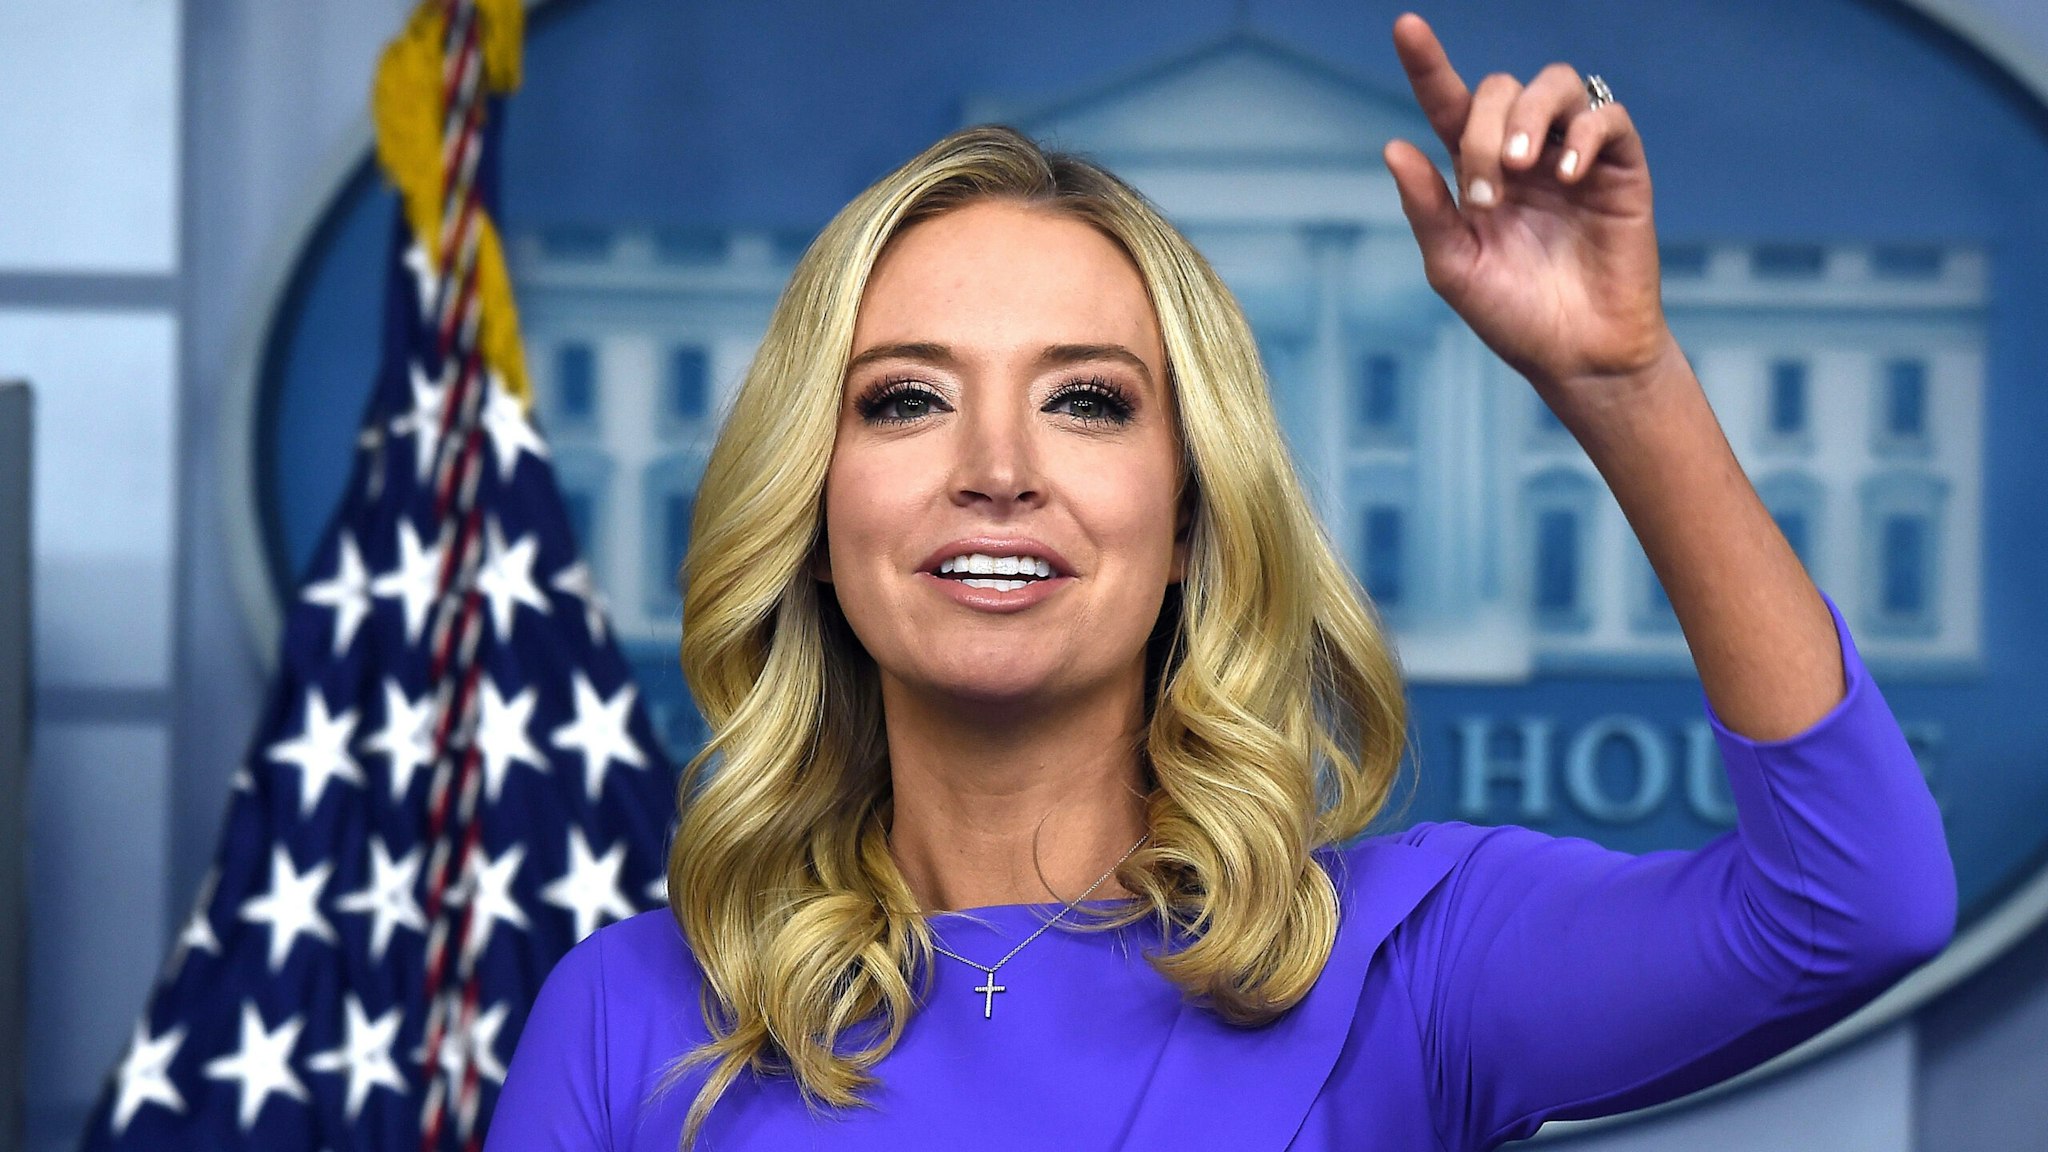 White House Press Secretary Kayleigh McEnany speaks during a press briefing on December 15, 2020, in the Brady Briefing Room of the White House in Washington, DC.